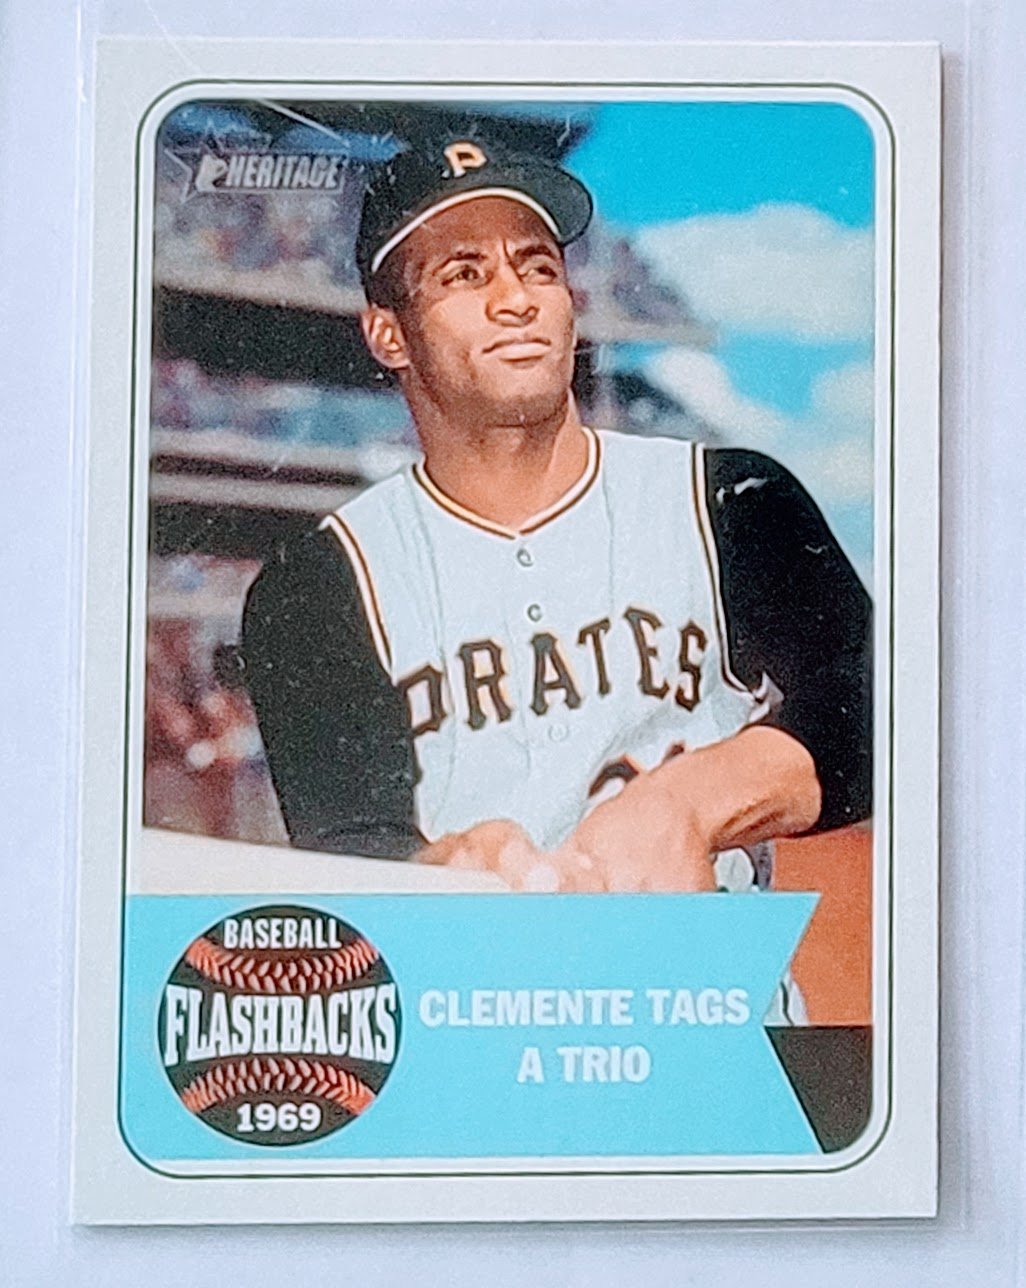 2018 Topps Heritage Roberto Clemente 1969 Flashbacks Insert Baseball Card TPTV simple Xclusive Collectibles   